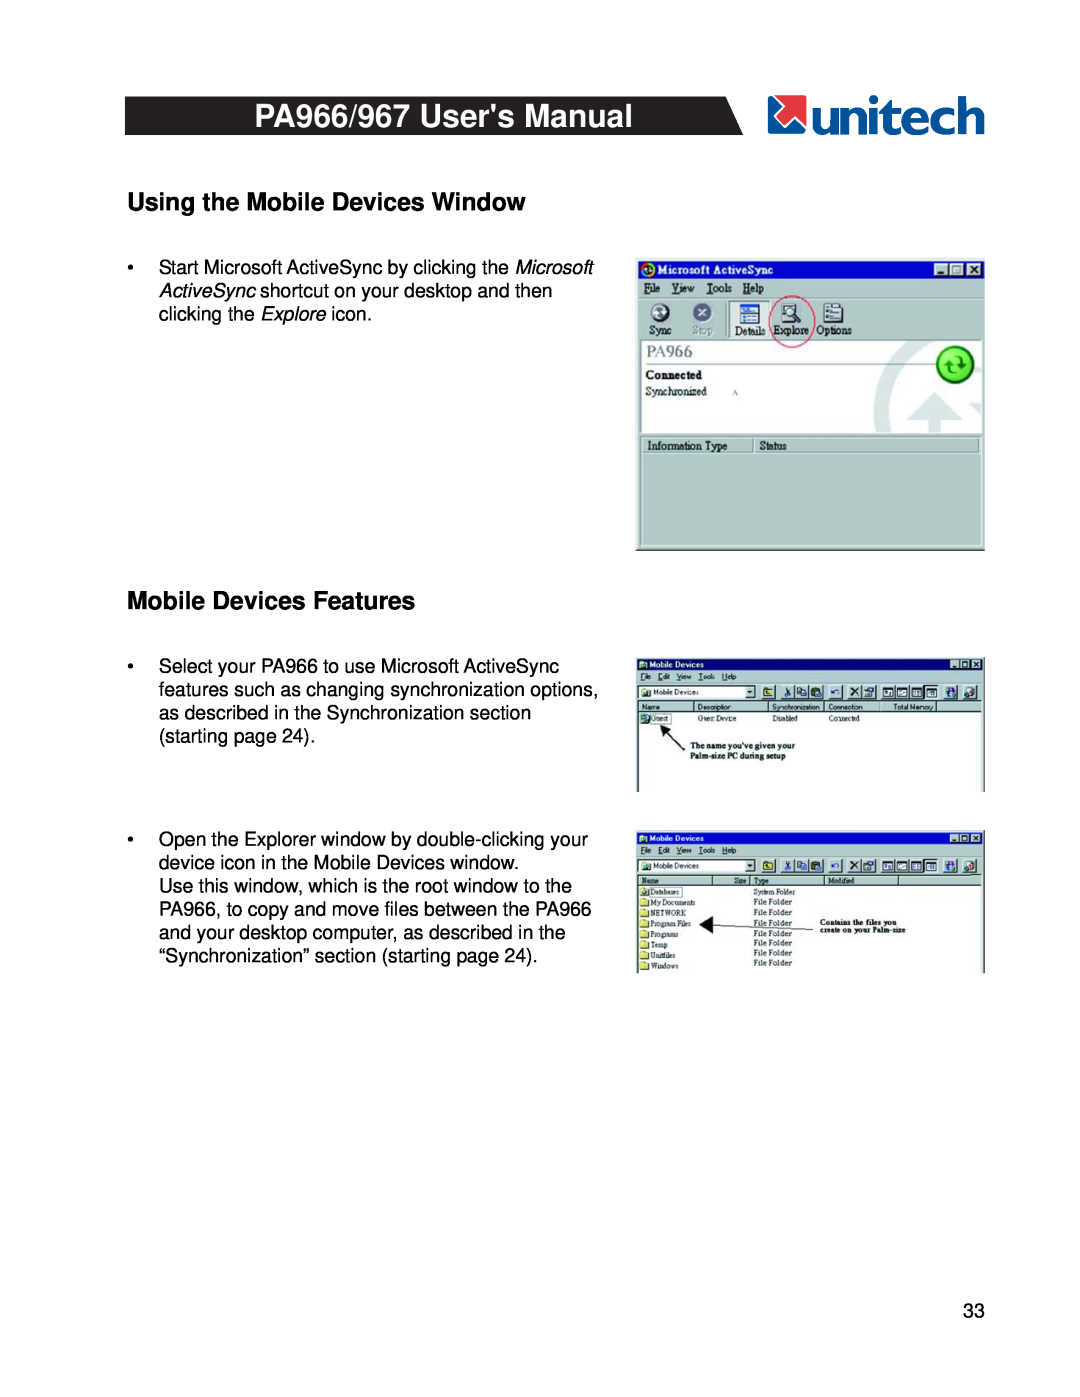 Unitech PA966, PA967 user manual Using the Mobile Devices Window, Mobile Devices Features 